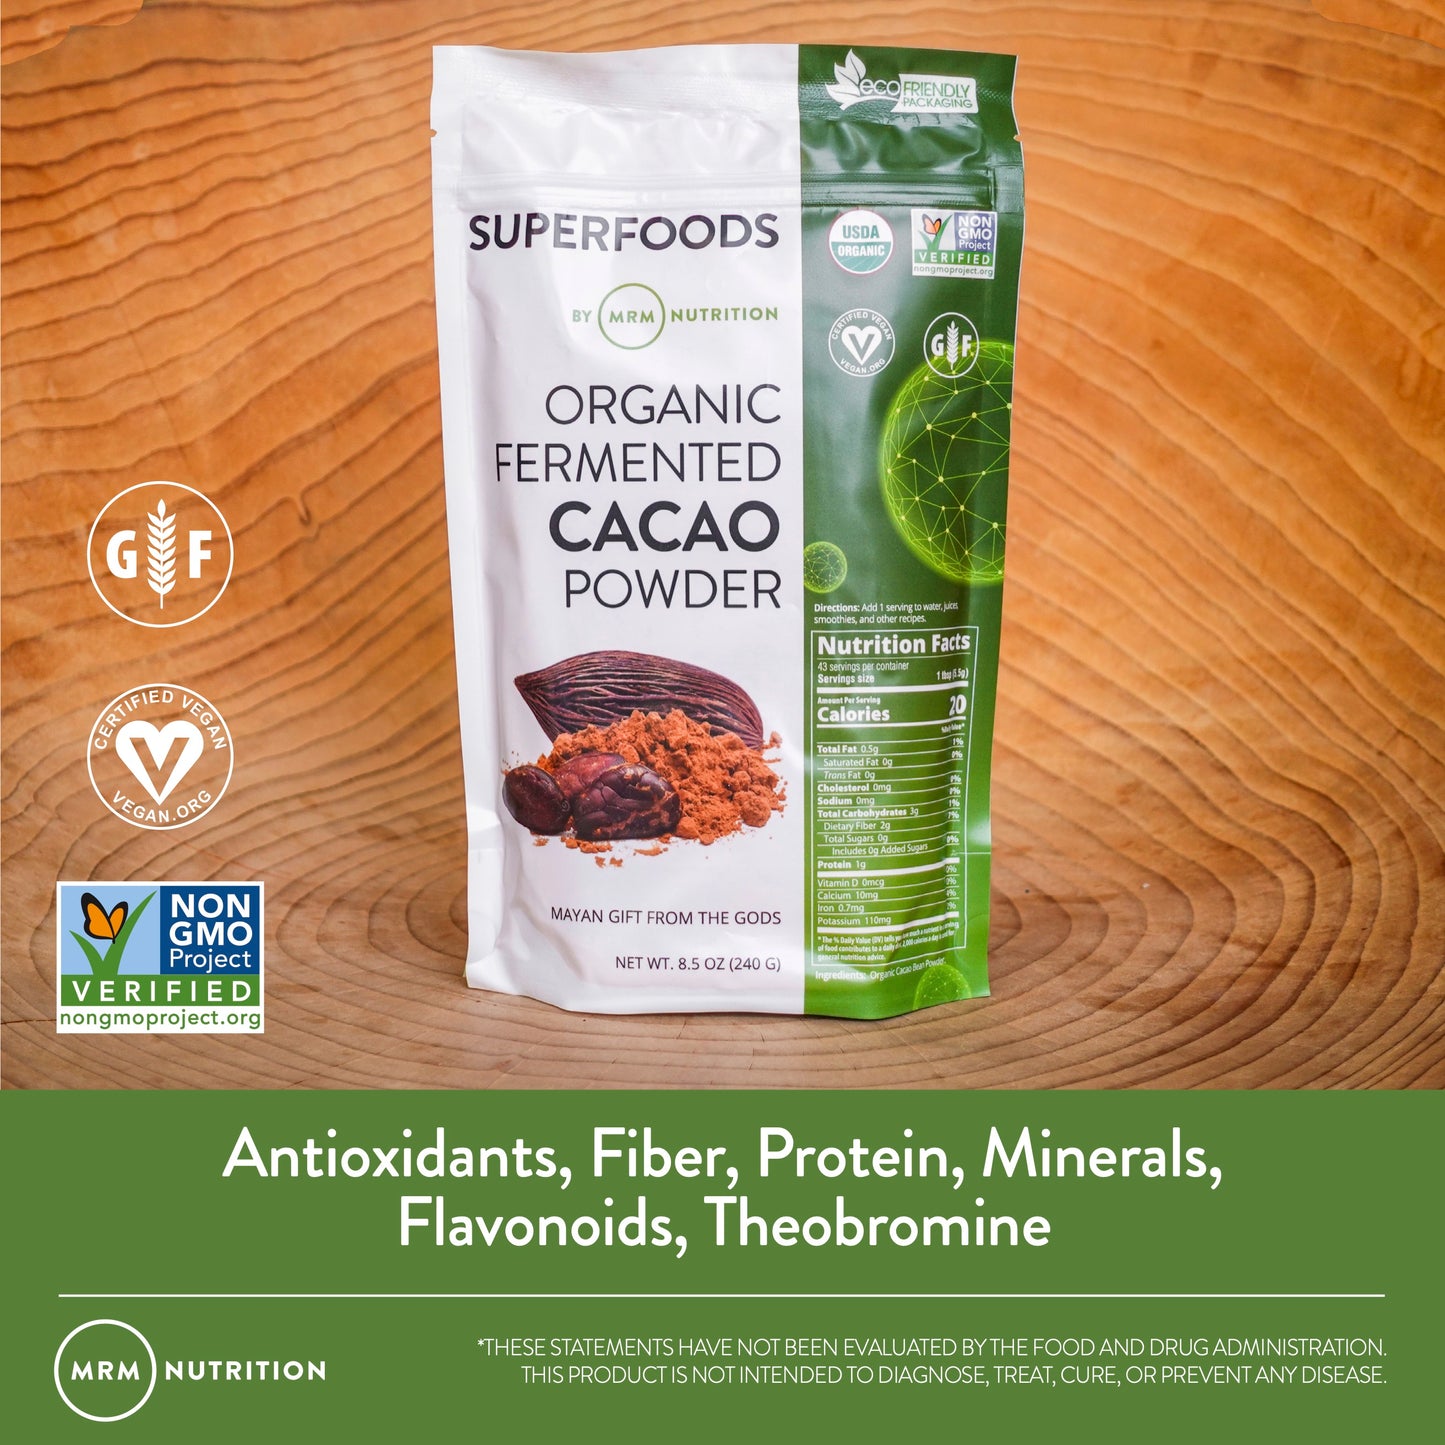 Superfoods - Organic Fermented Cacao Powder